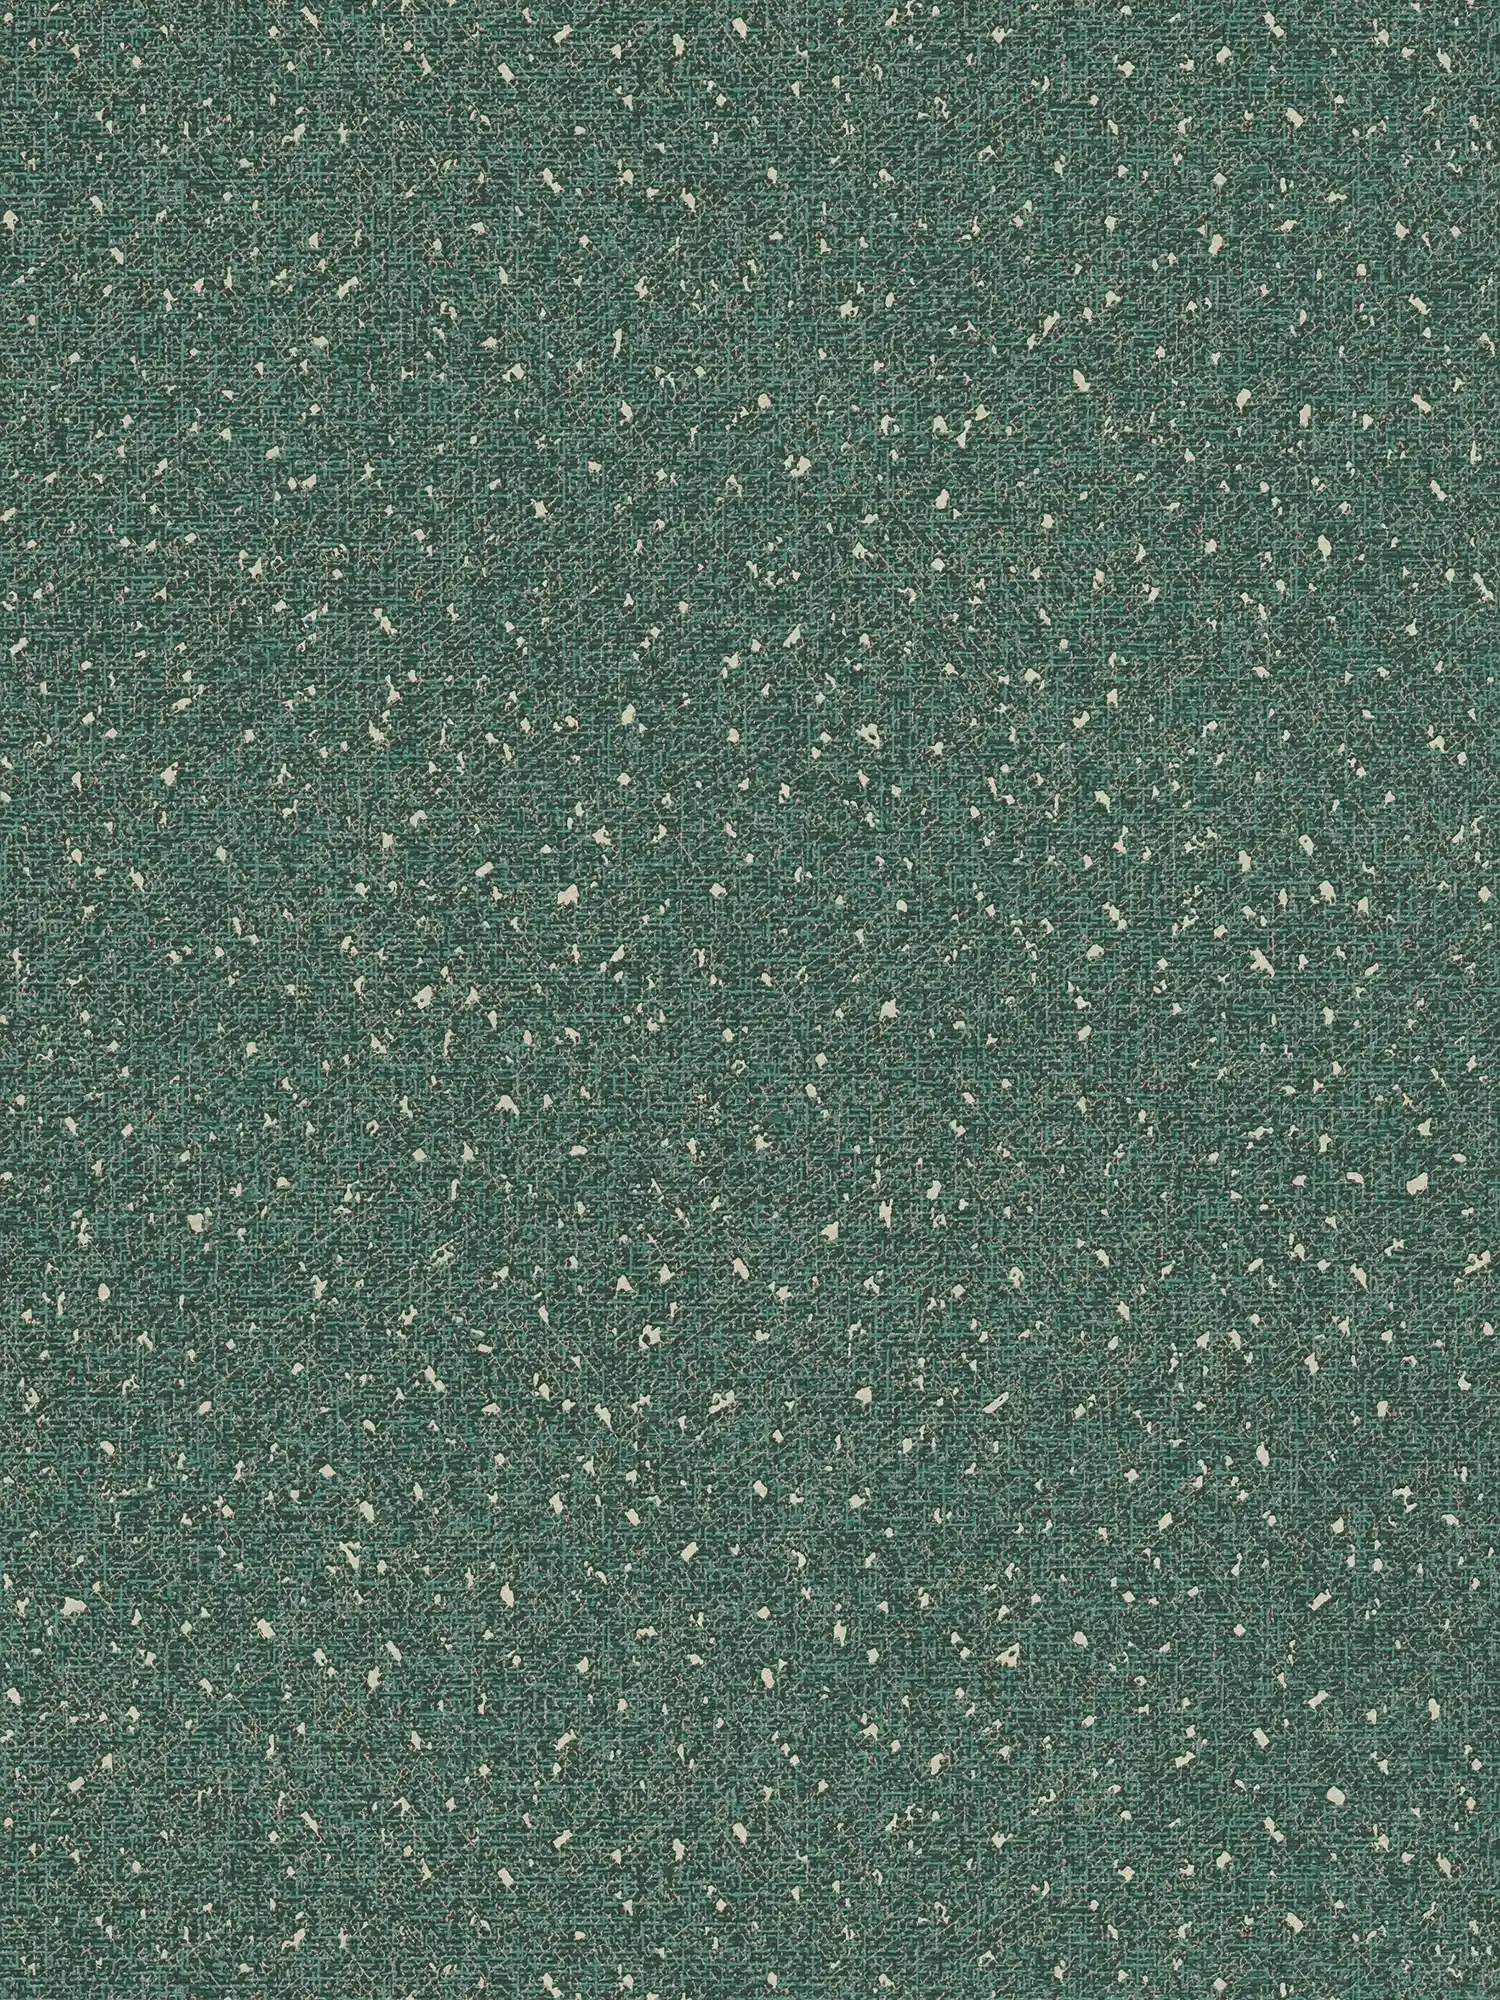 Wallpaper with textile structure and metallic accent - green, metallic
